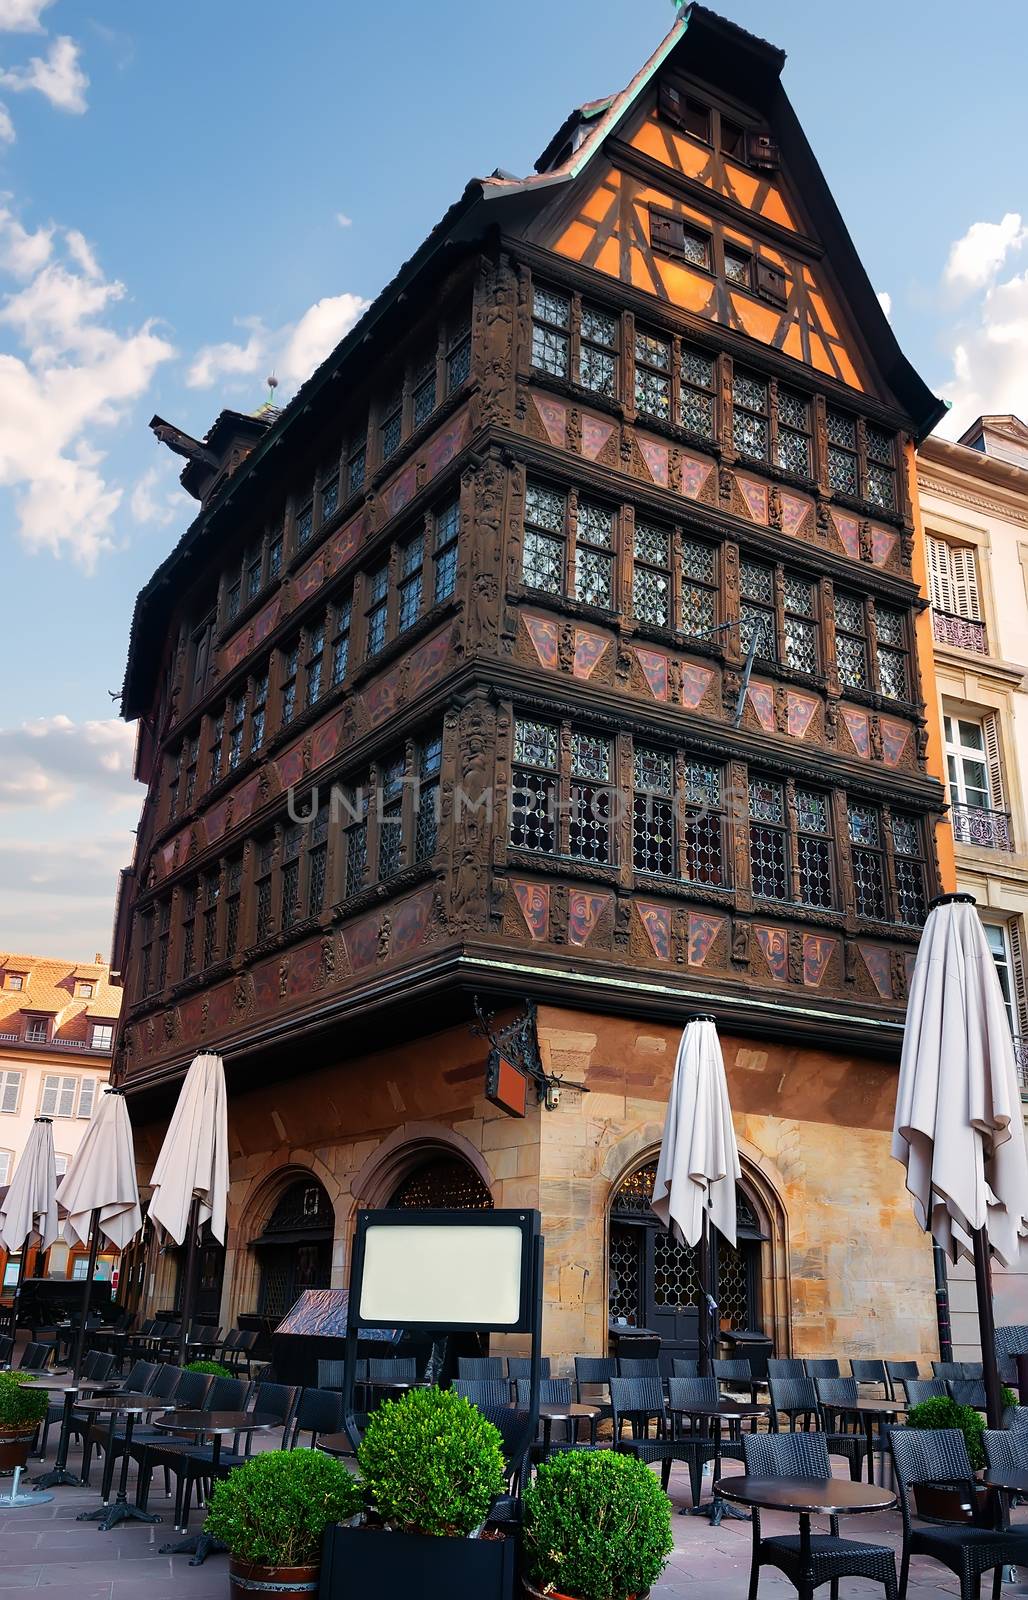 House of Kammerzell in Strasbourg by Givaga